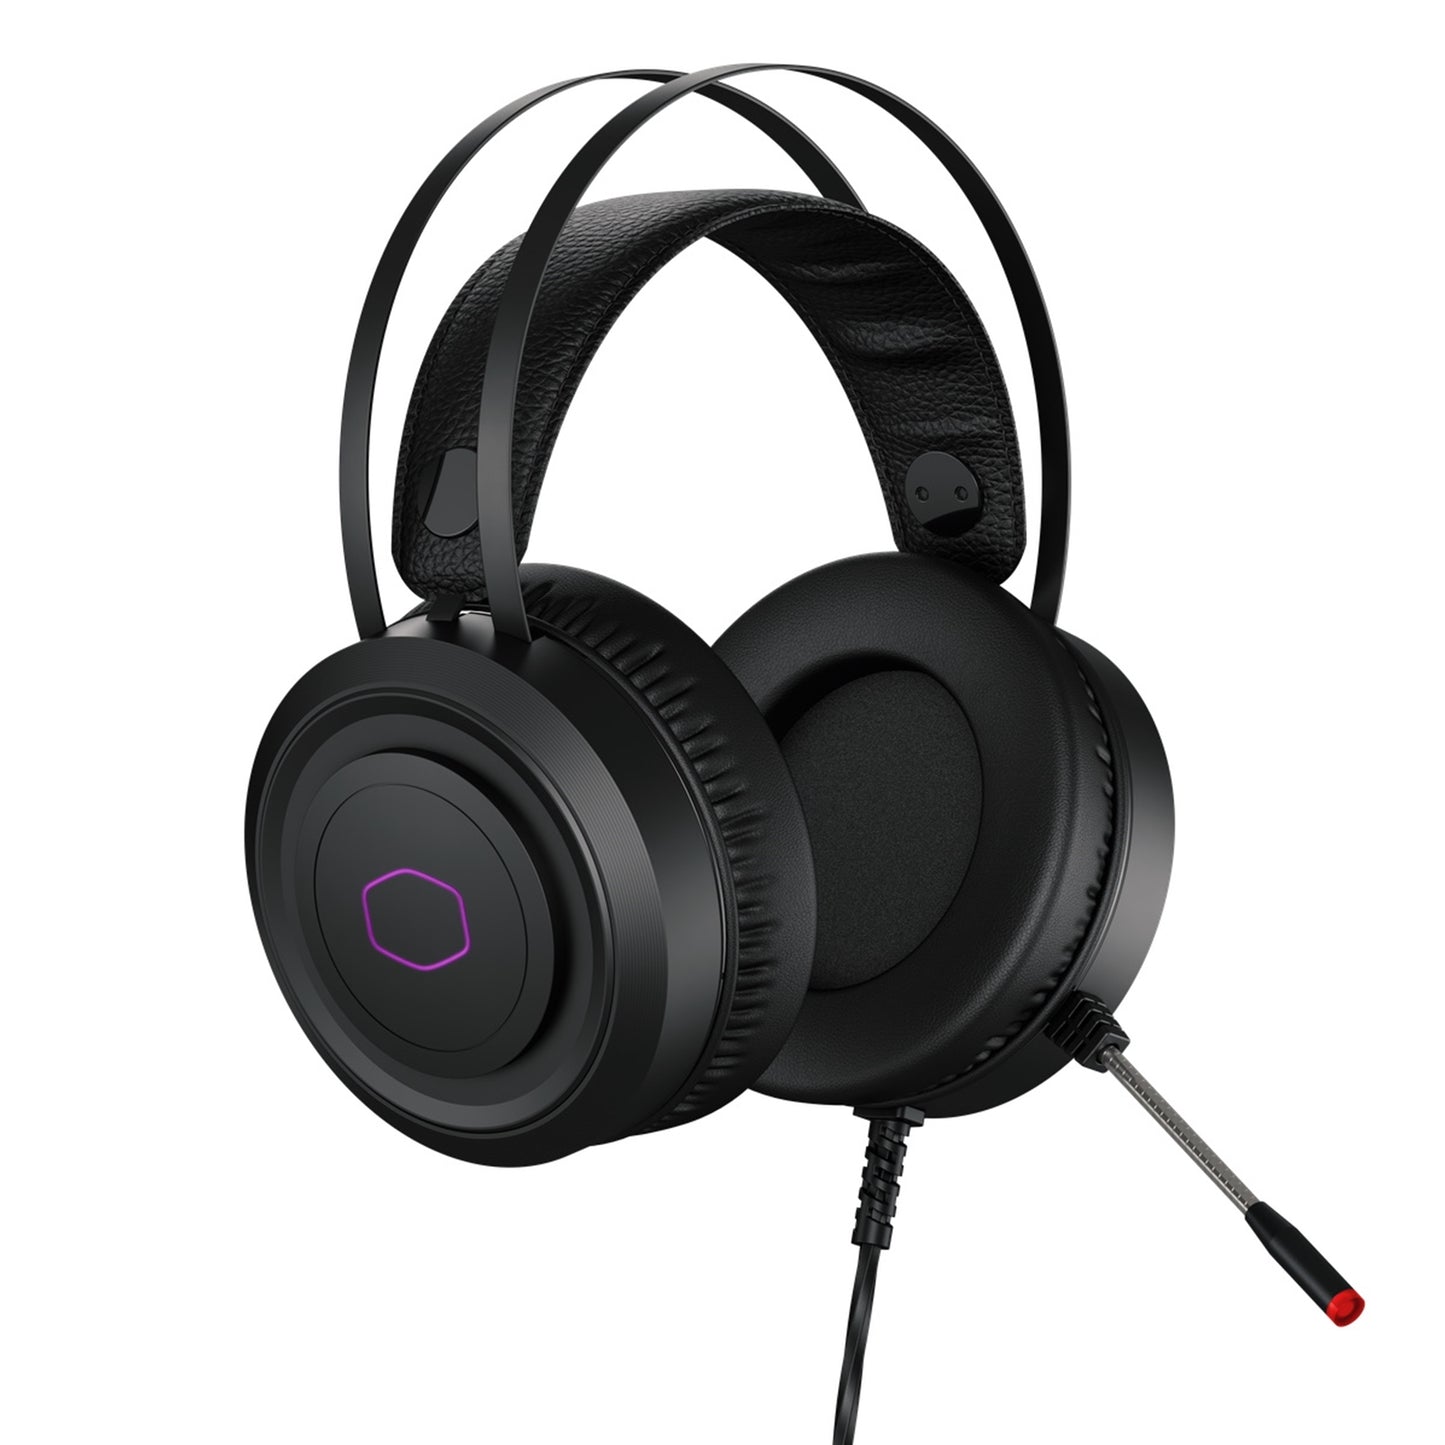 Cooler Master CH321 Gaming Headset, USB Type-A, RGB Logo - PC, Xbox One, PS3 and PS4 Compatible